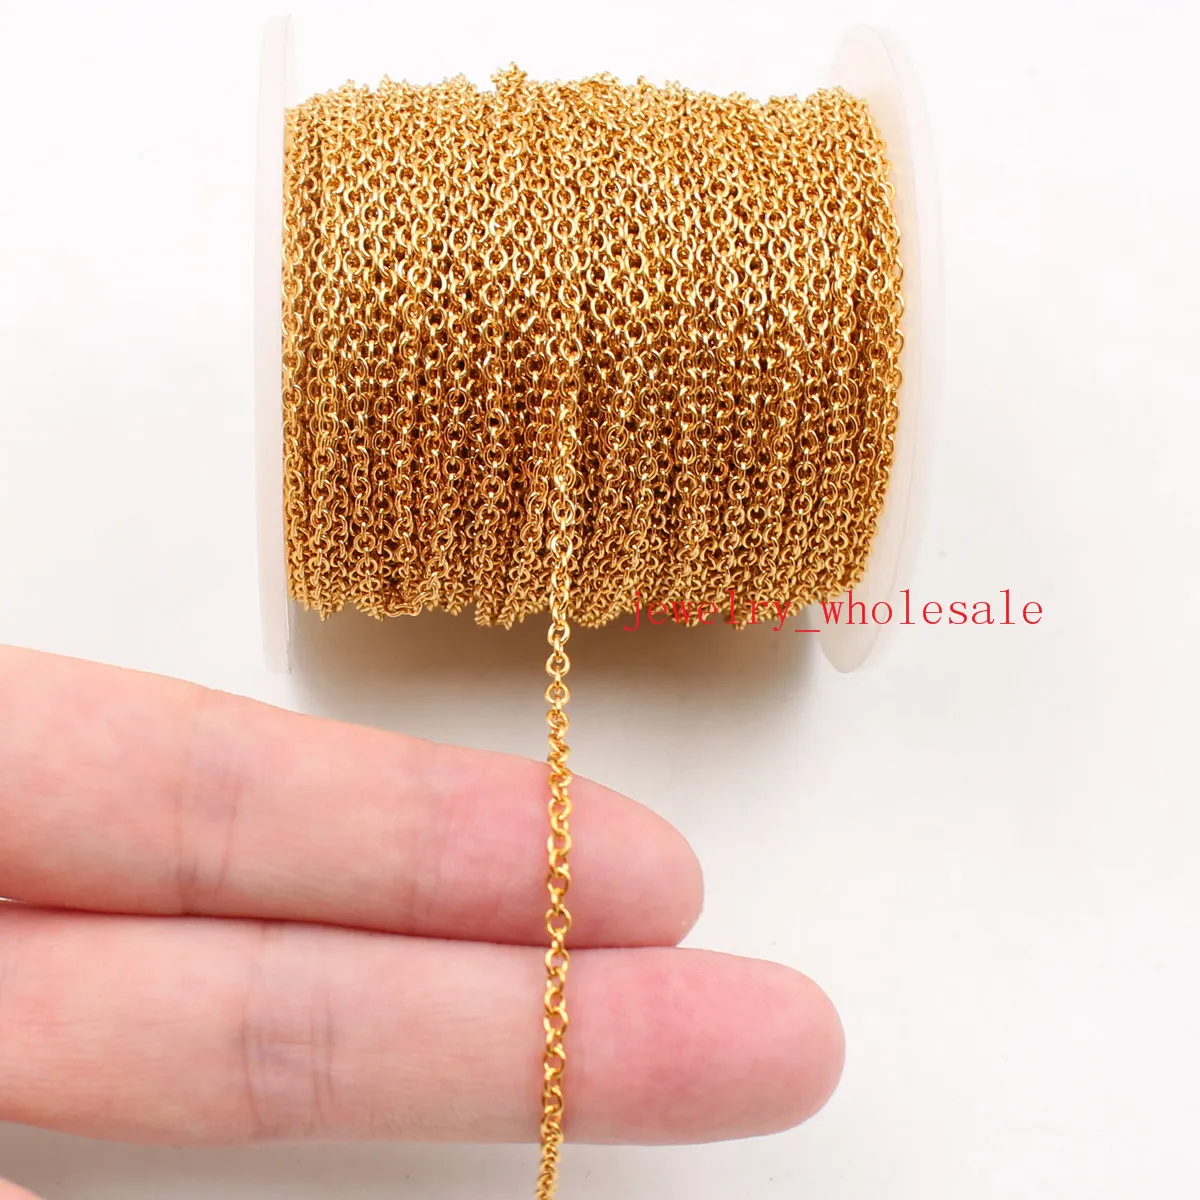 Hot selling 50meter/Roll wholesale Jewelry Finding Chain Gold Stainless Steel Strong thin 2mm Links soldered Flat Link Oval Chain JEWLERY